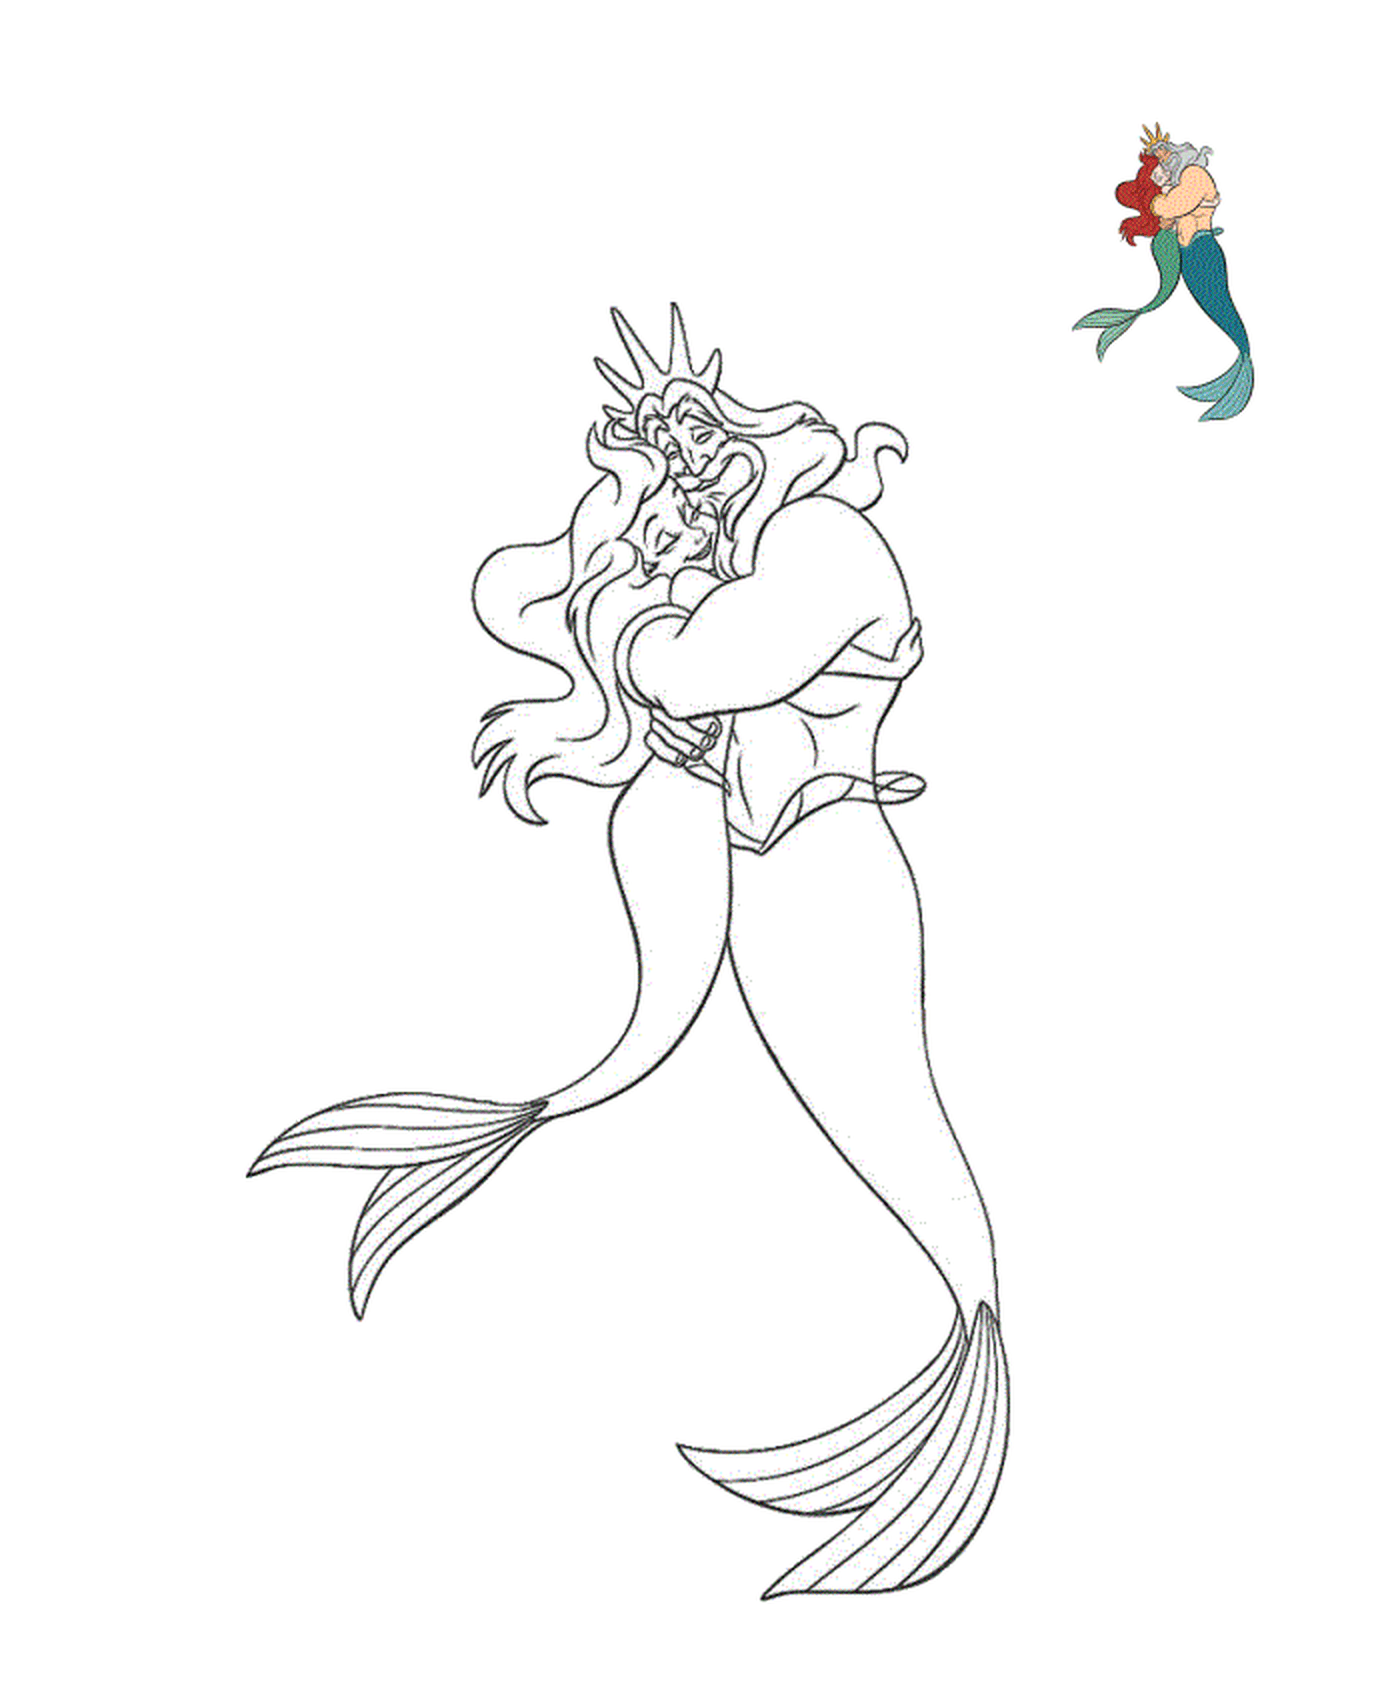  A woman in a mermaid suit 